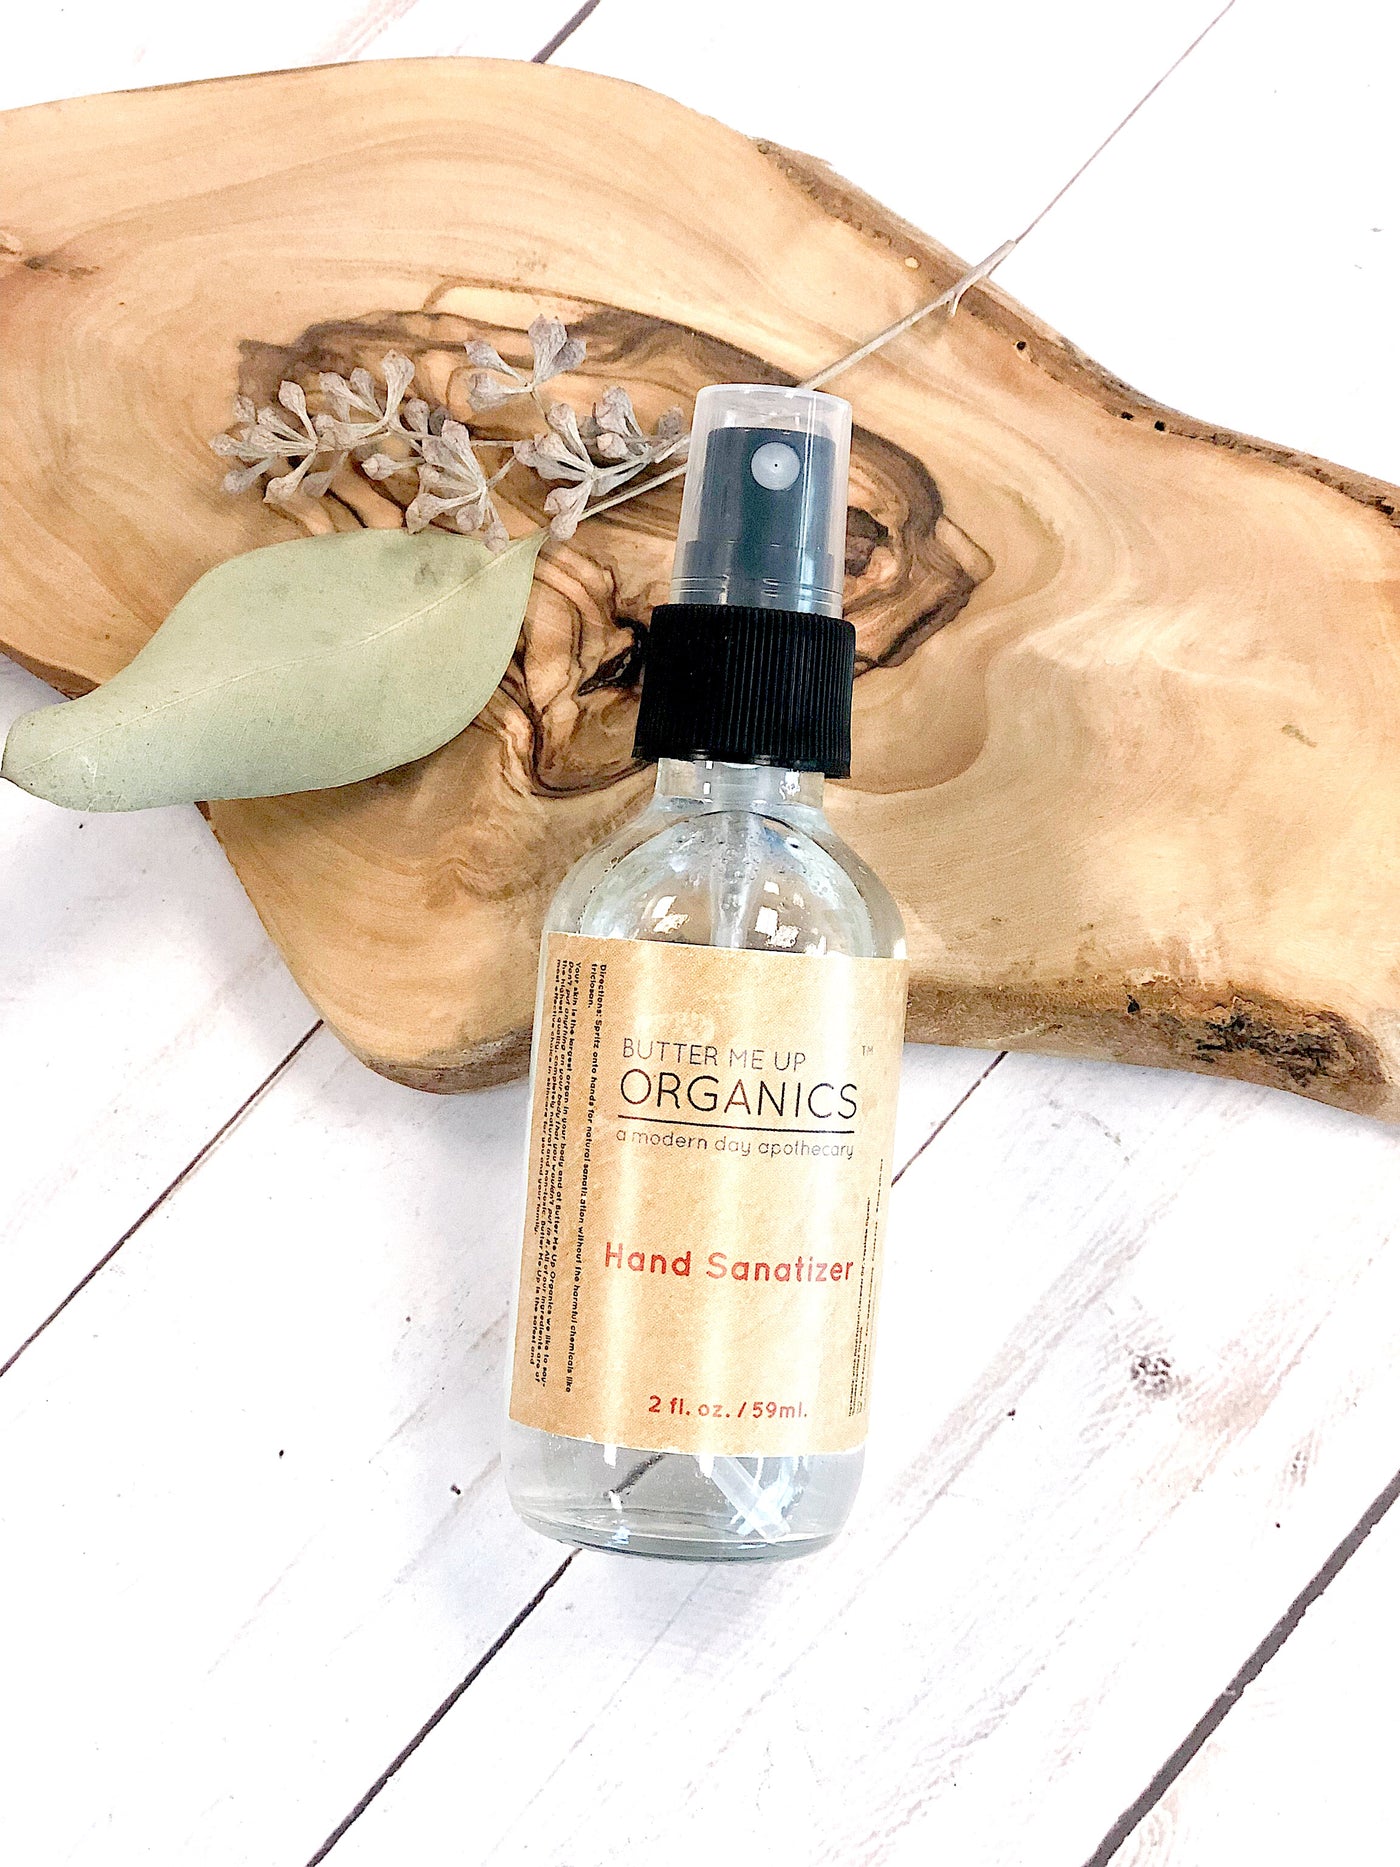 Organic Vegan Cruelty-Free Hand Sanitizer (Triclosan Free) - Roses & Chains | Fashionable Clothing, Shoes, Accessories, & More